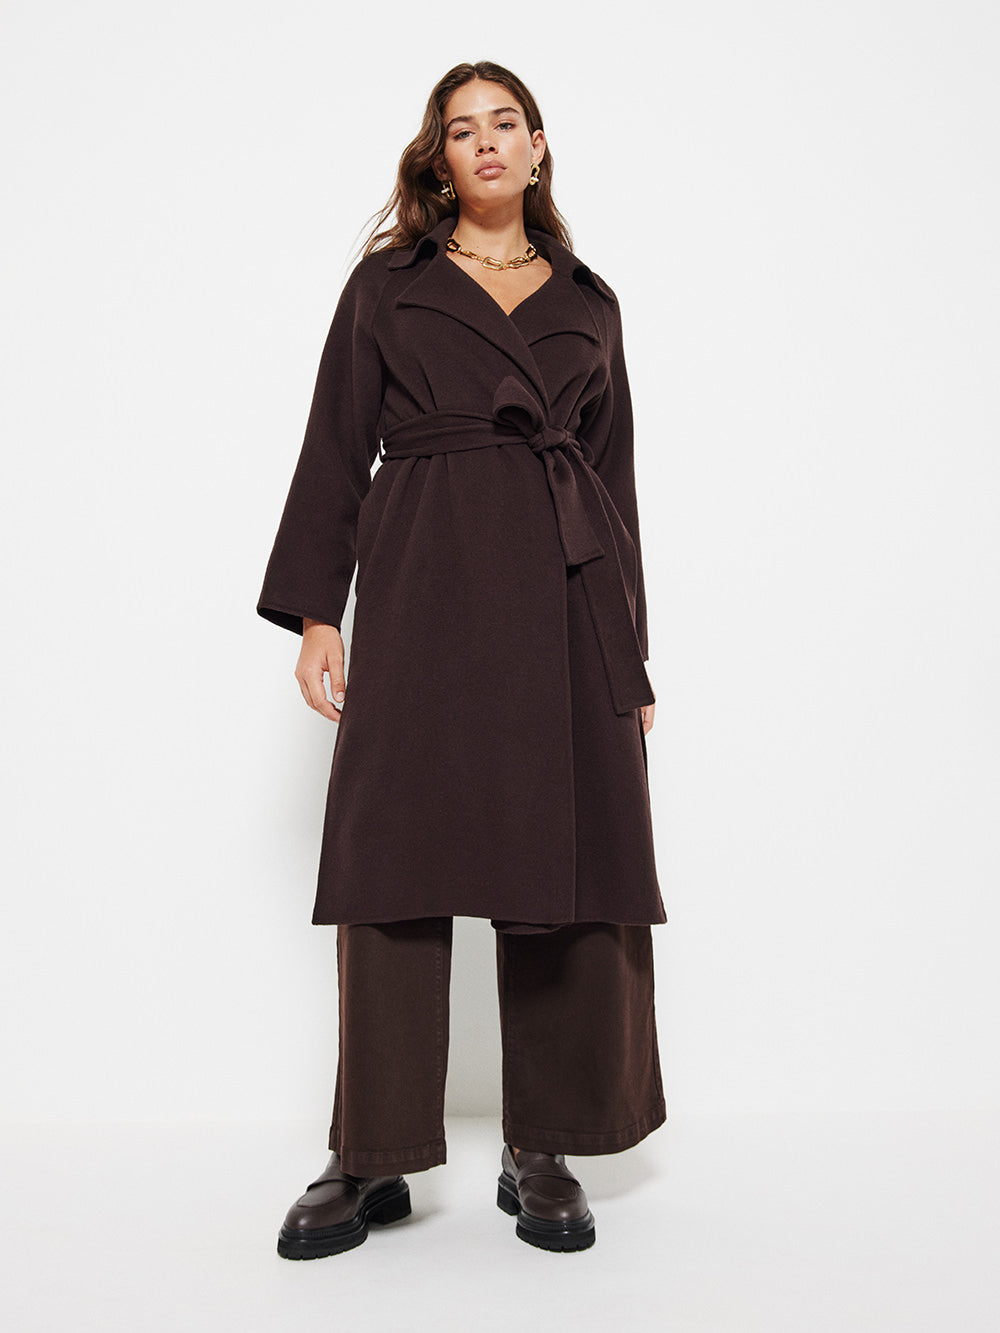 The Double Faced Wool Trench